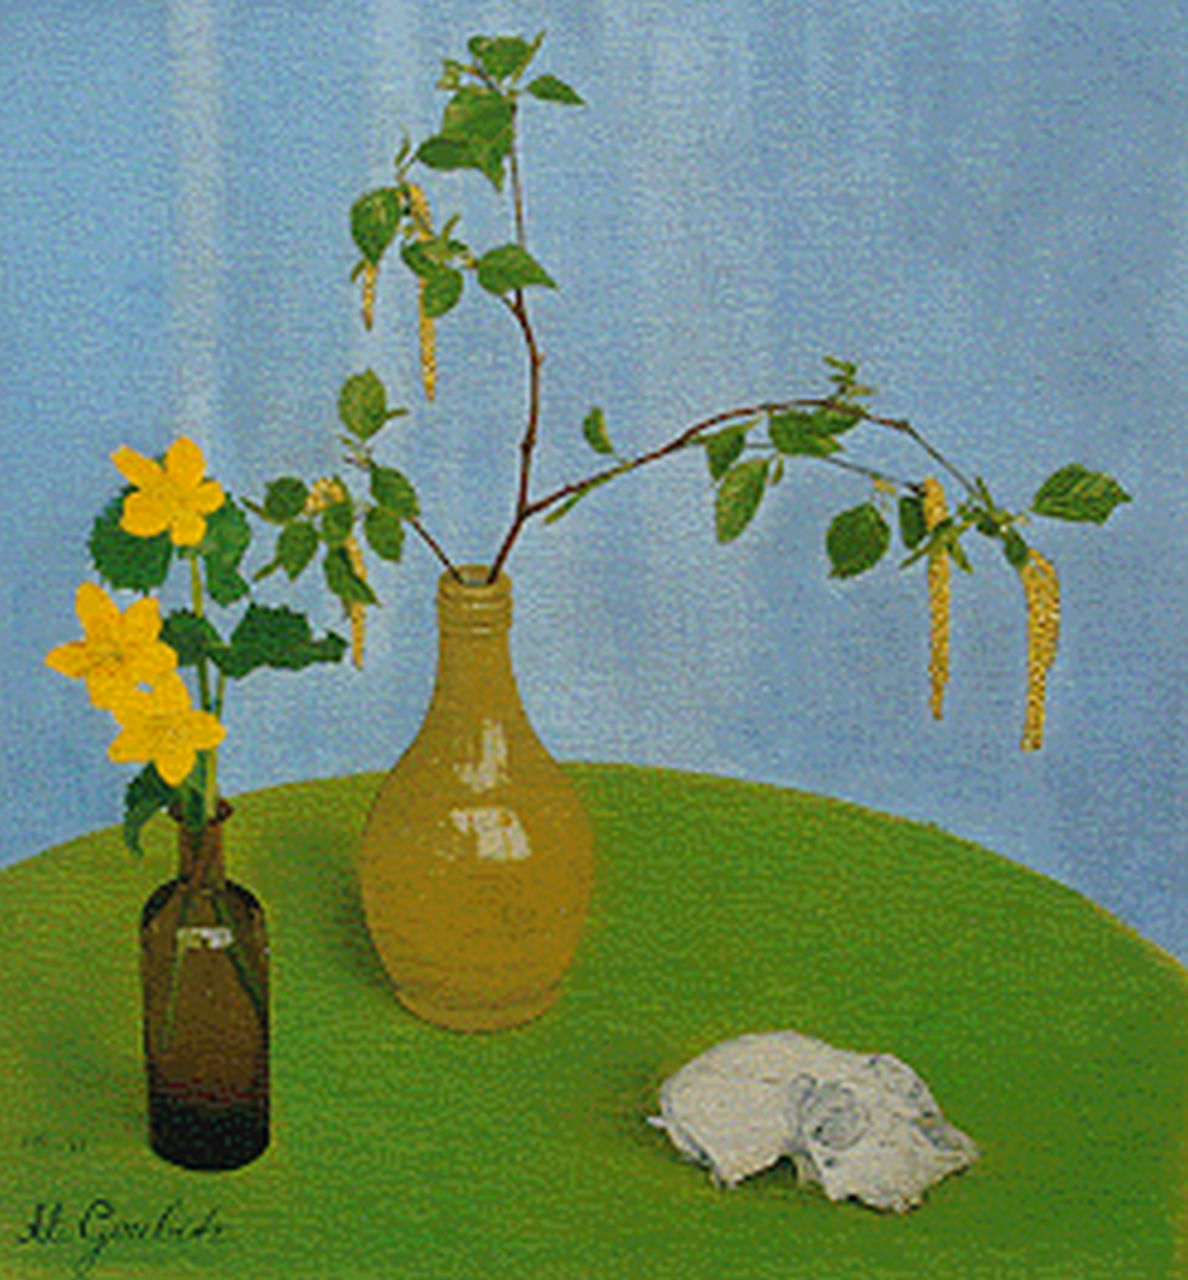 Goubitz A.  | 'Ali' Alida Goubitz, A Flower Still Life, oil on canvas 25.3 x 23.9 cm, signed l.l. and executed on 31-8-31